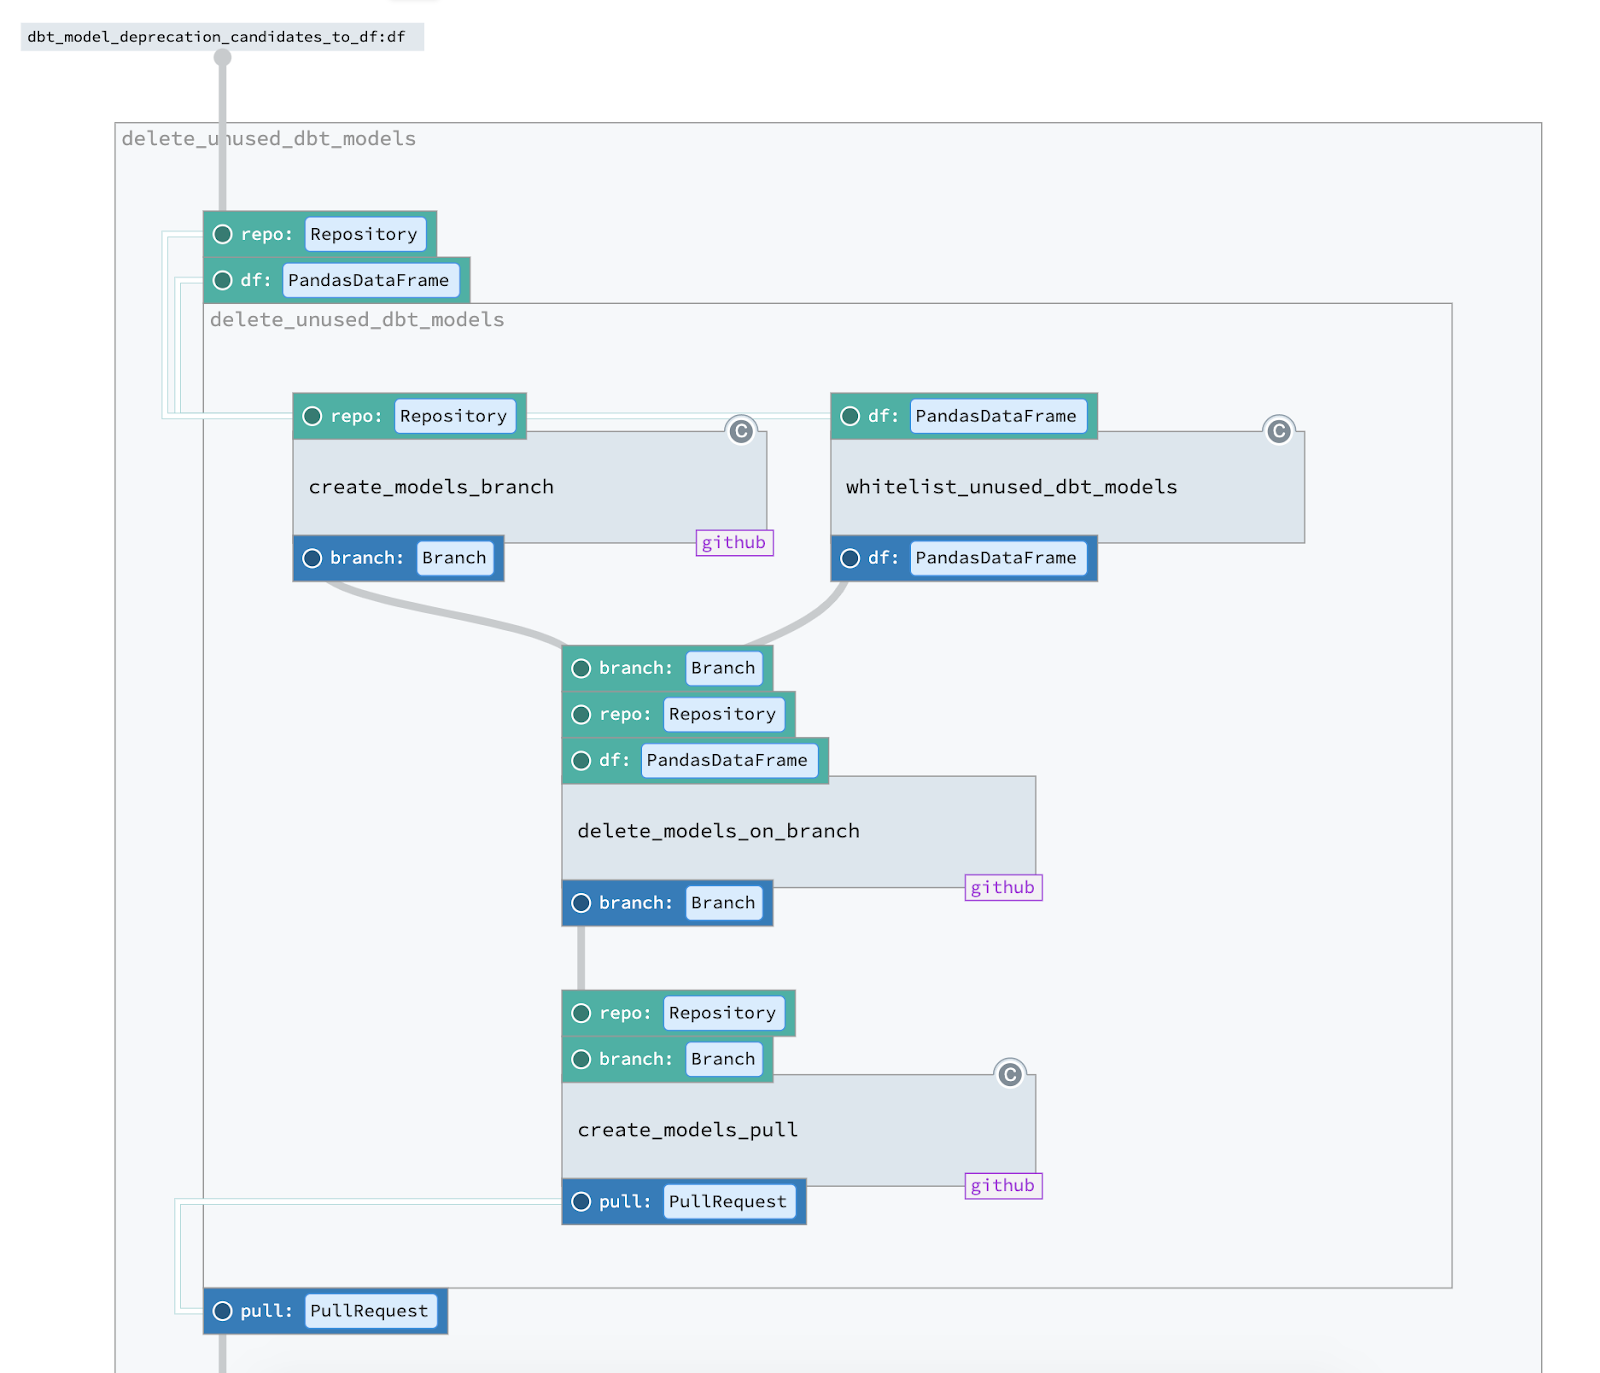 Fragment of our metapipeline that creates pull requests to delete stale dbt models.